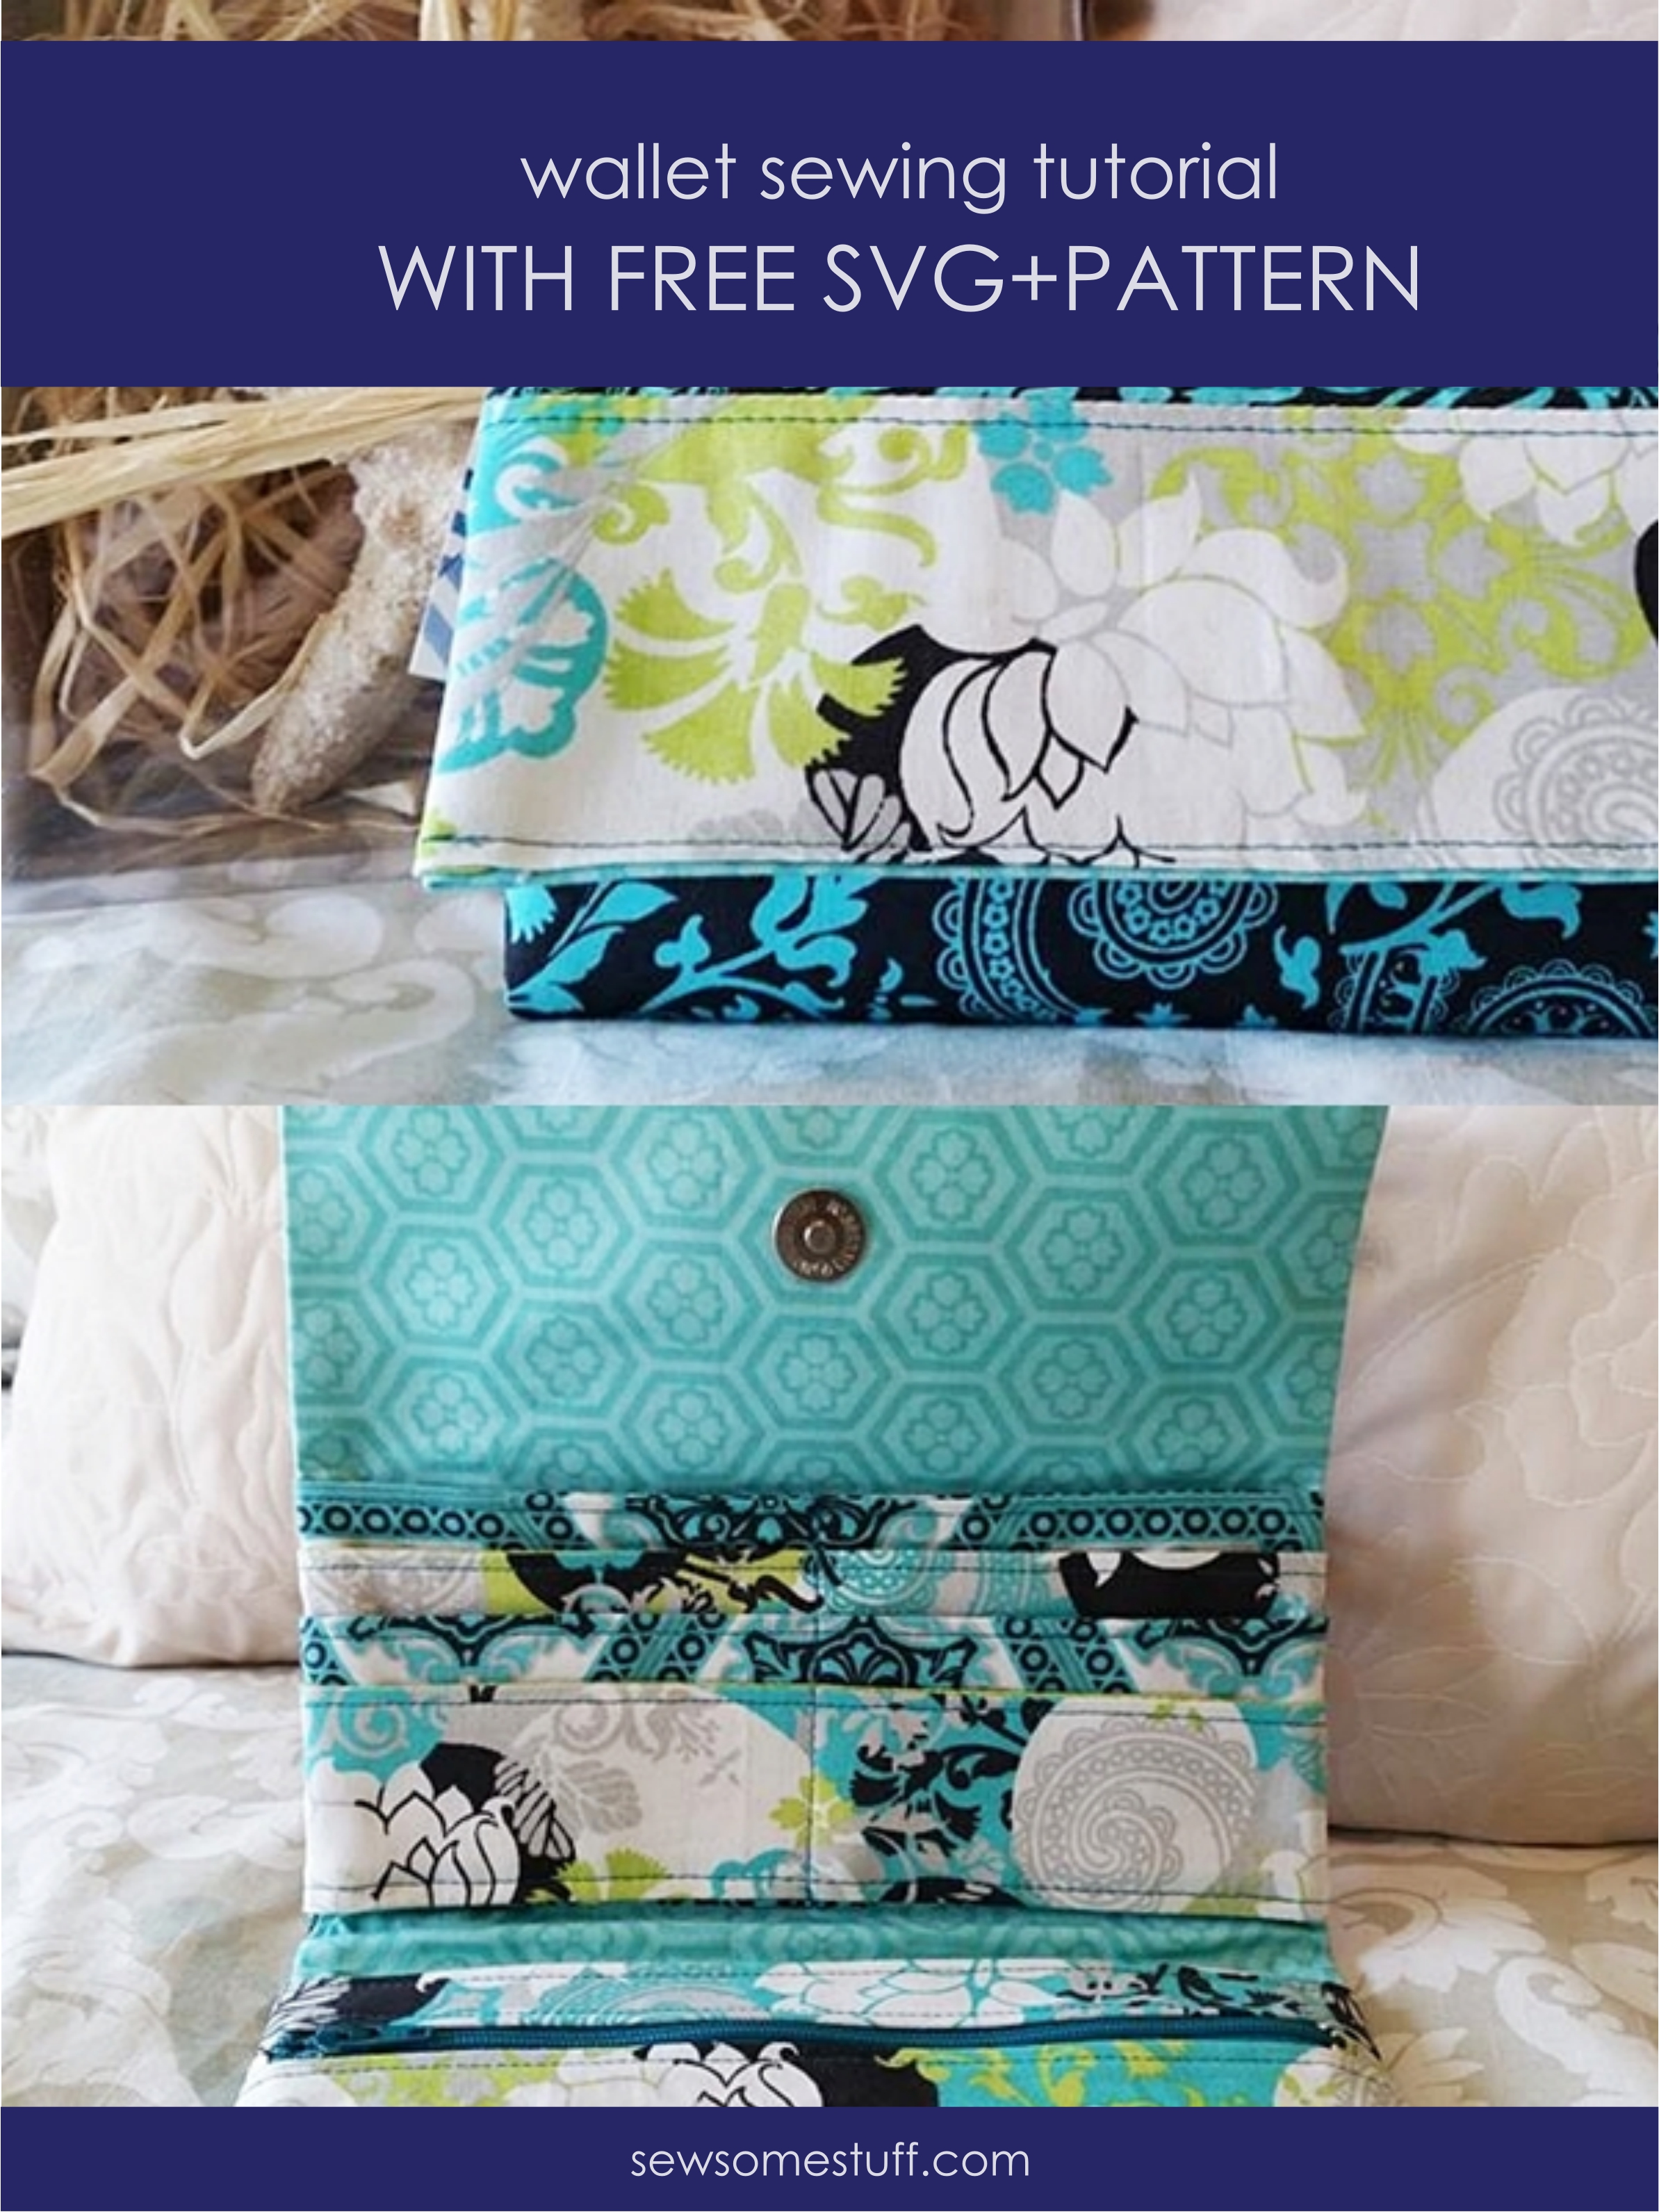 In this post, I'm sharing a free wallet pattern and a fabric handmade